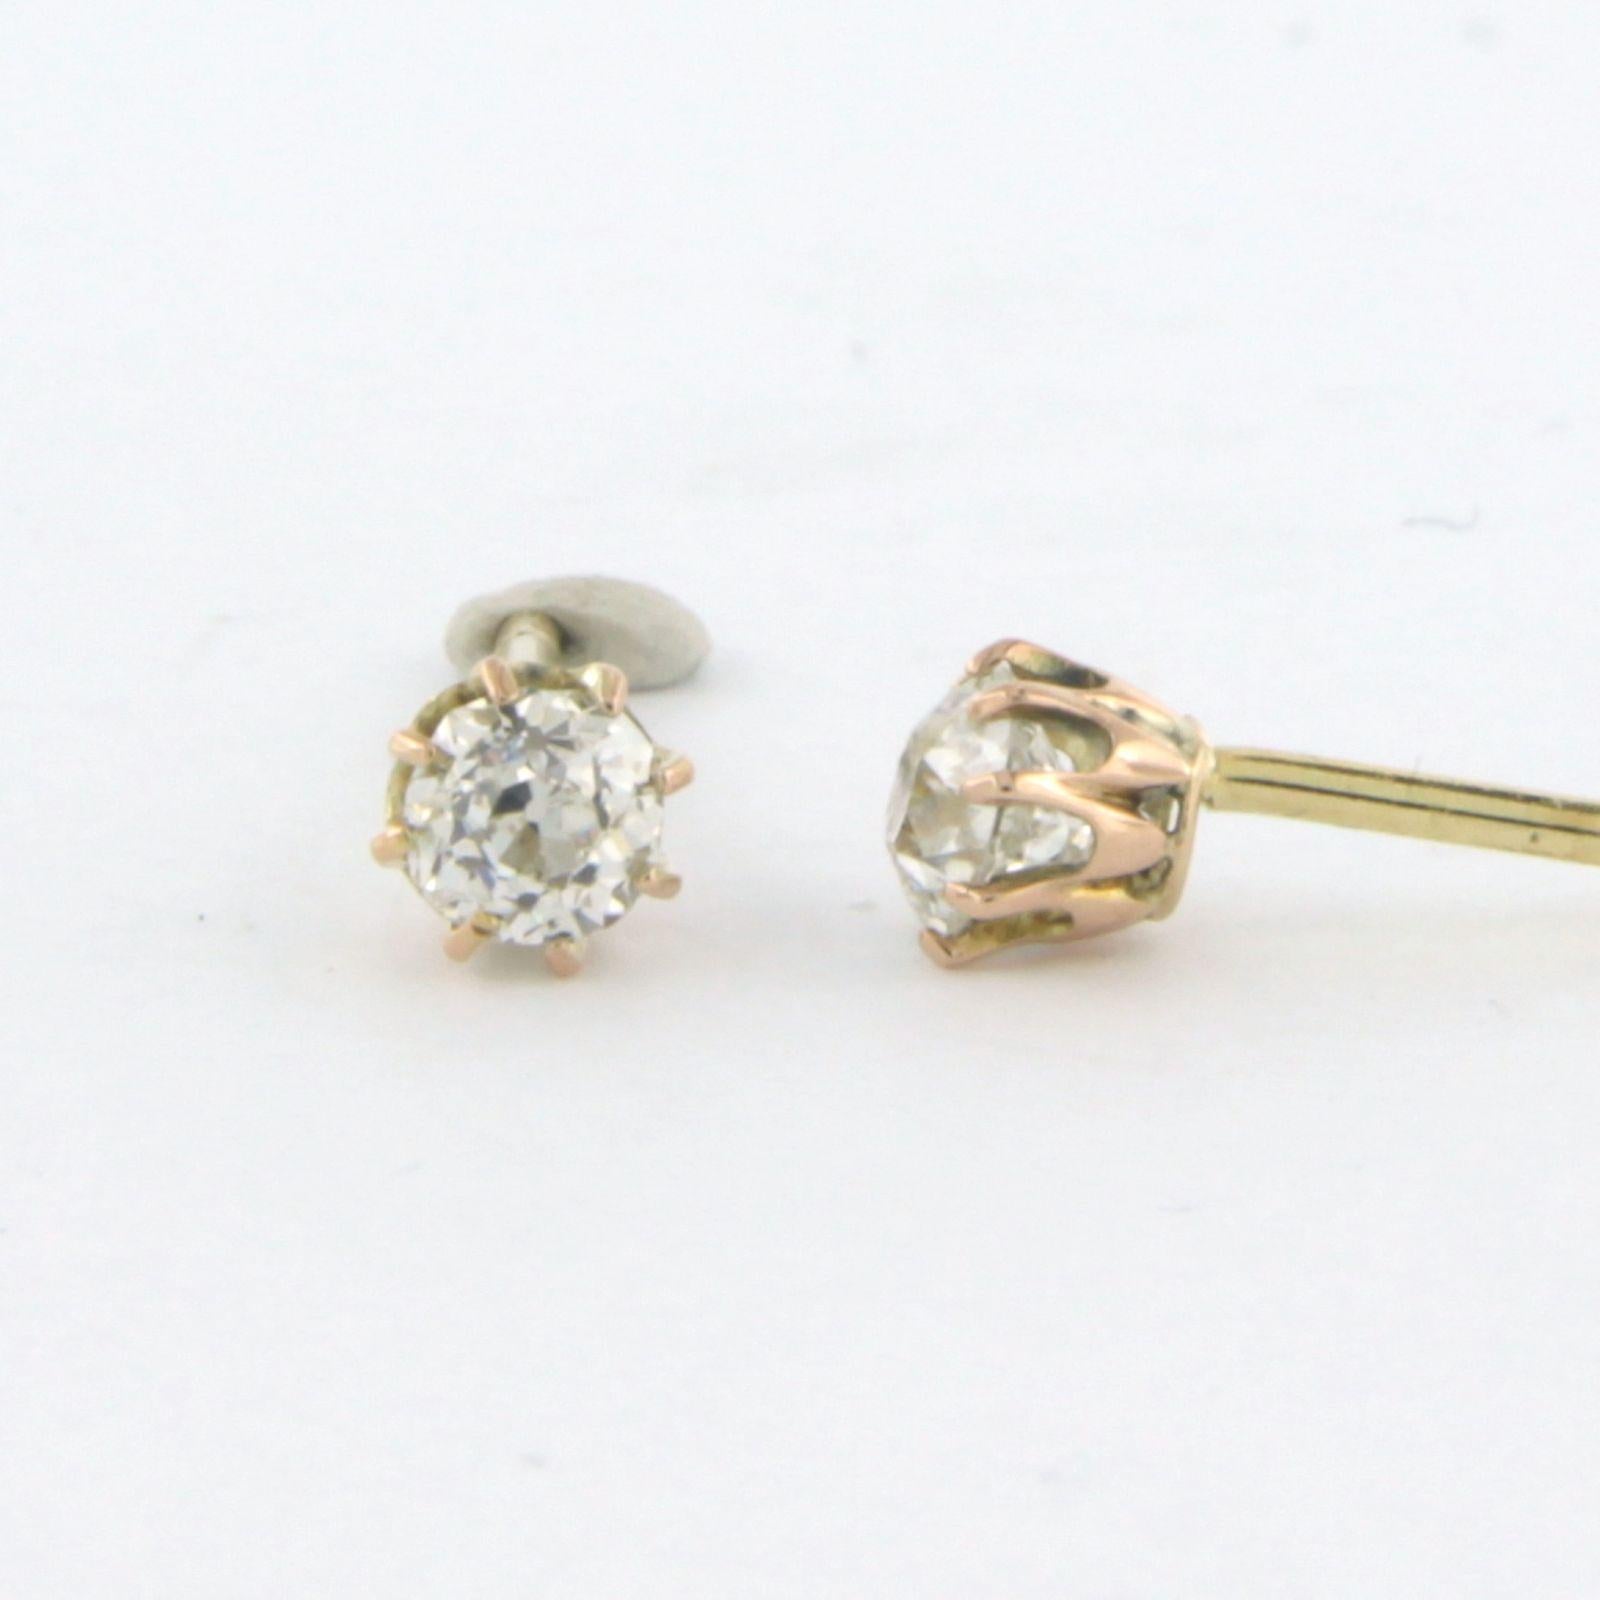 Women's Earring studs set with diamonds 18k yellow gold For Sale